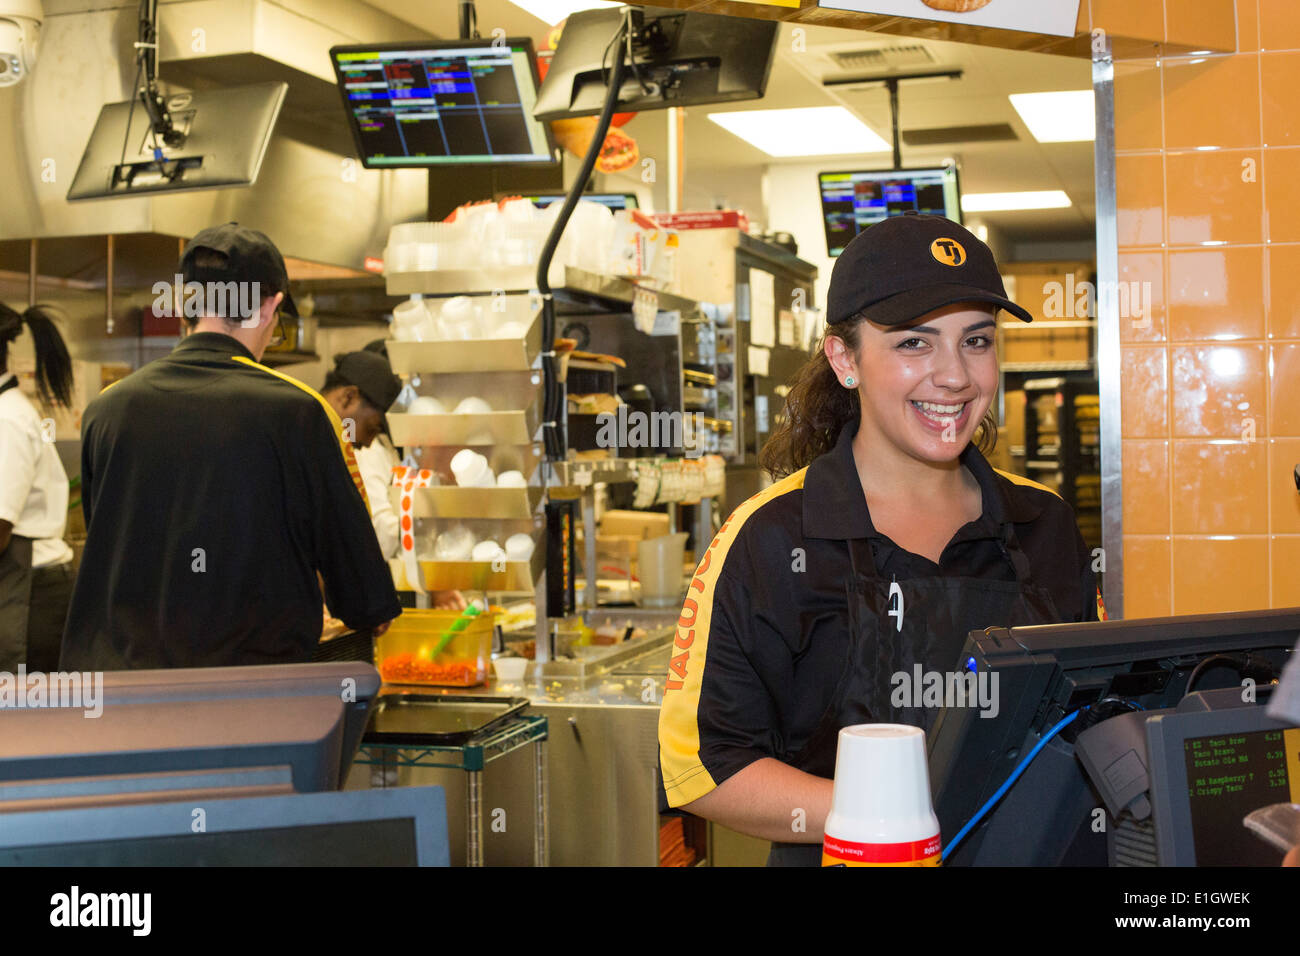 Watford City, North Dakota - Taco John's fast food restaurant, which is paying a $16-$20 starting wage for new hires. Stock Photo